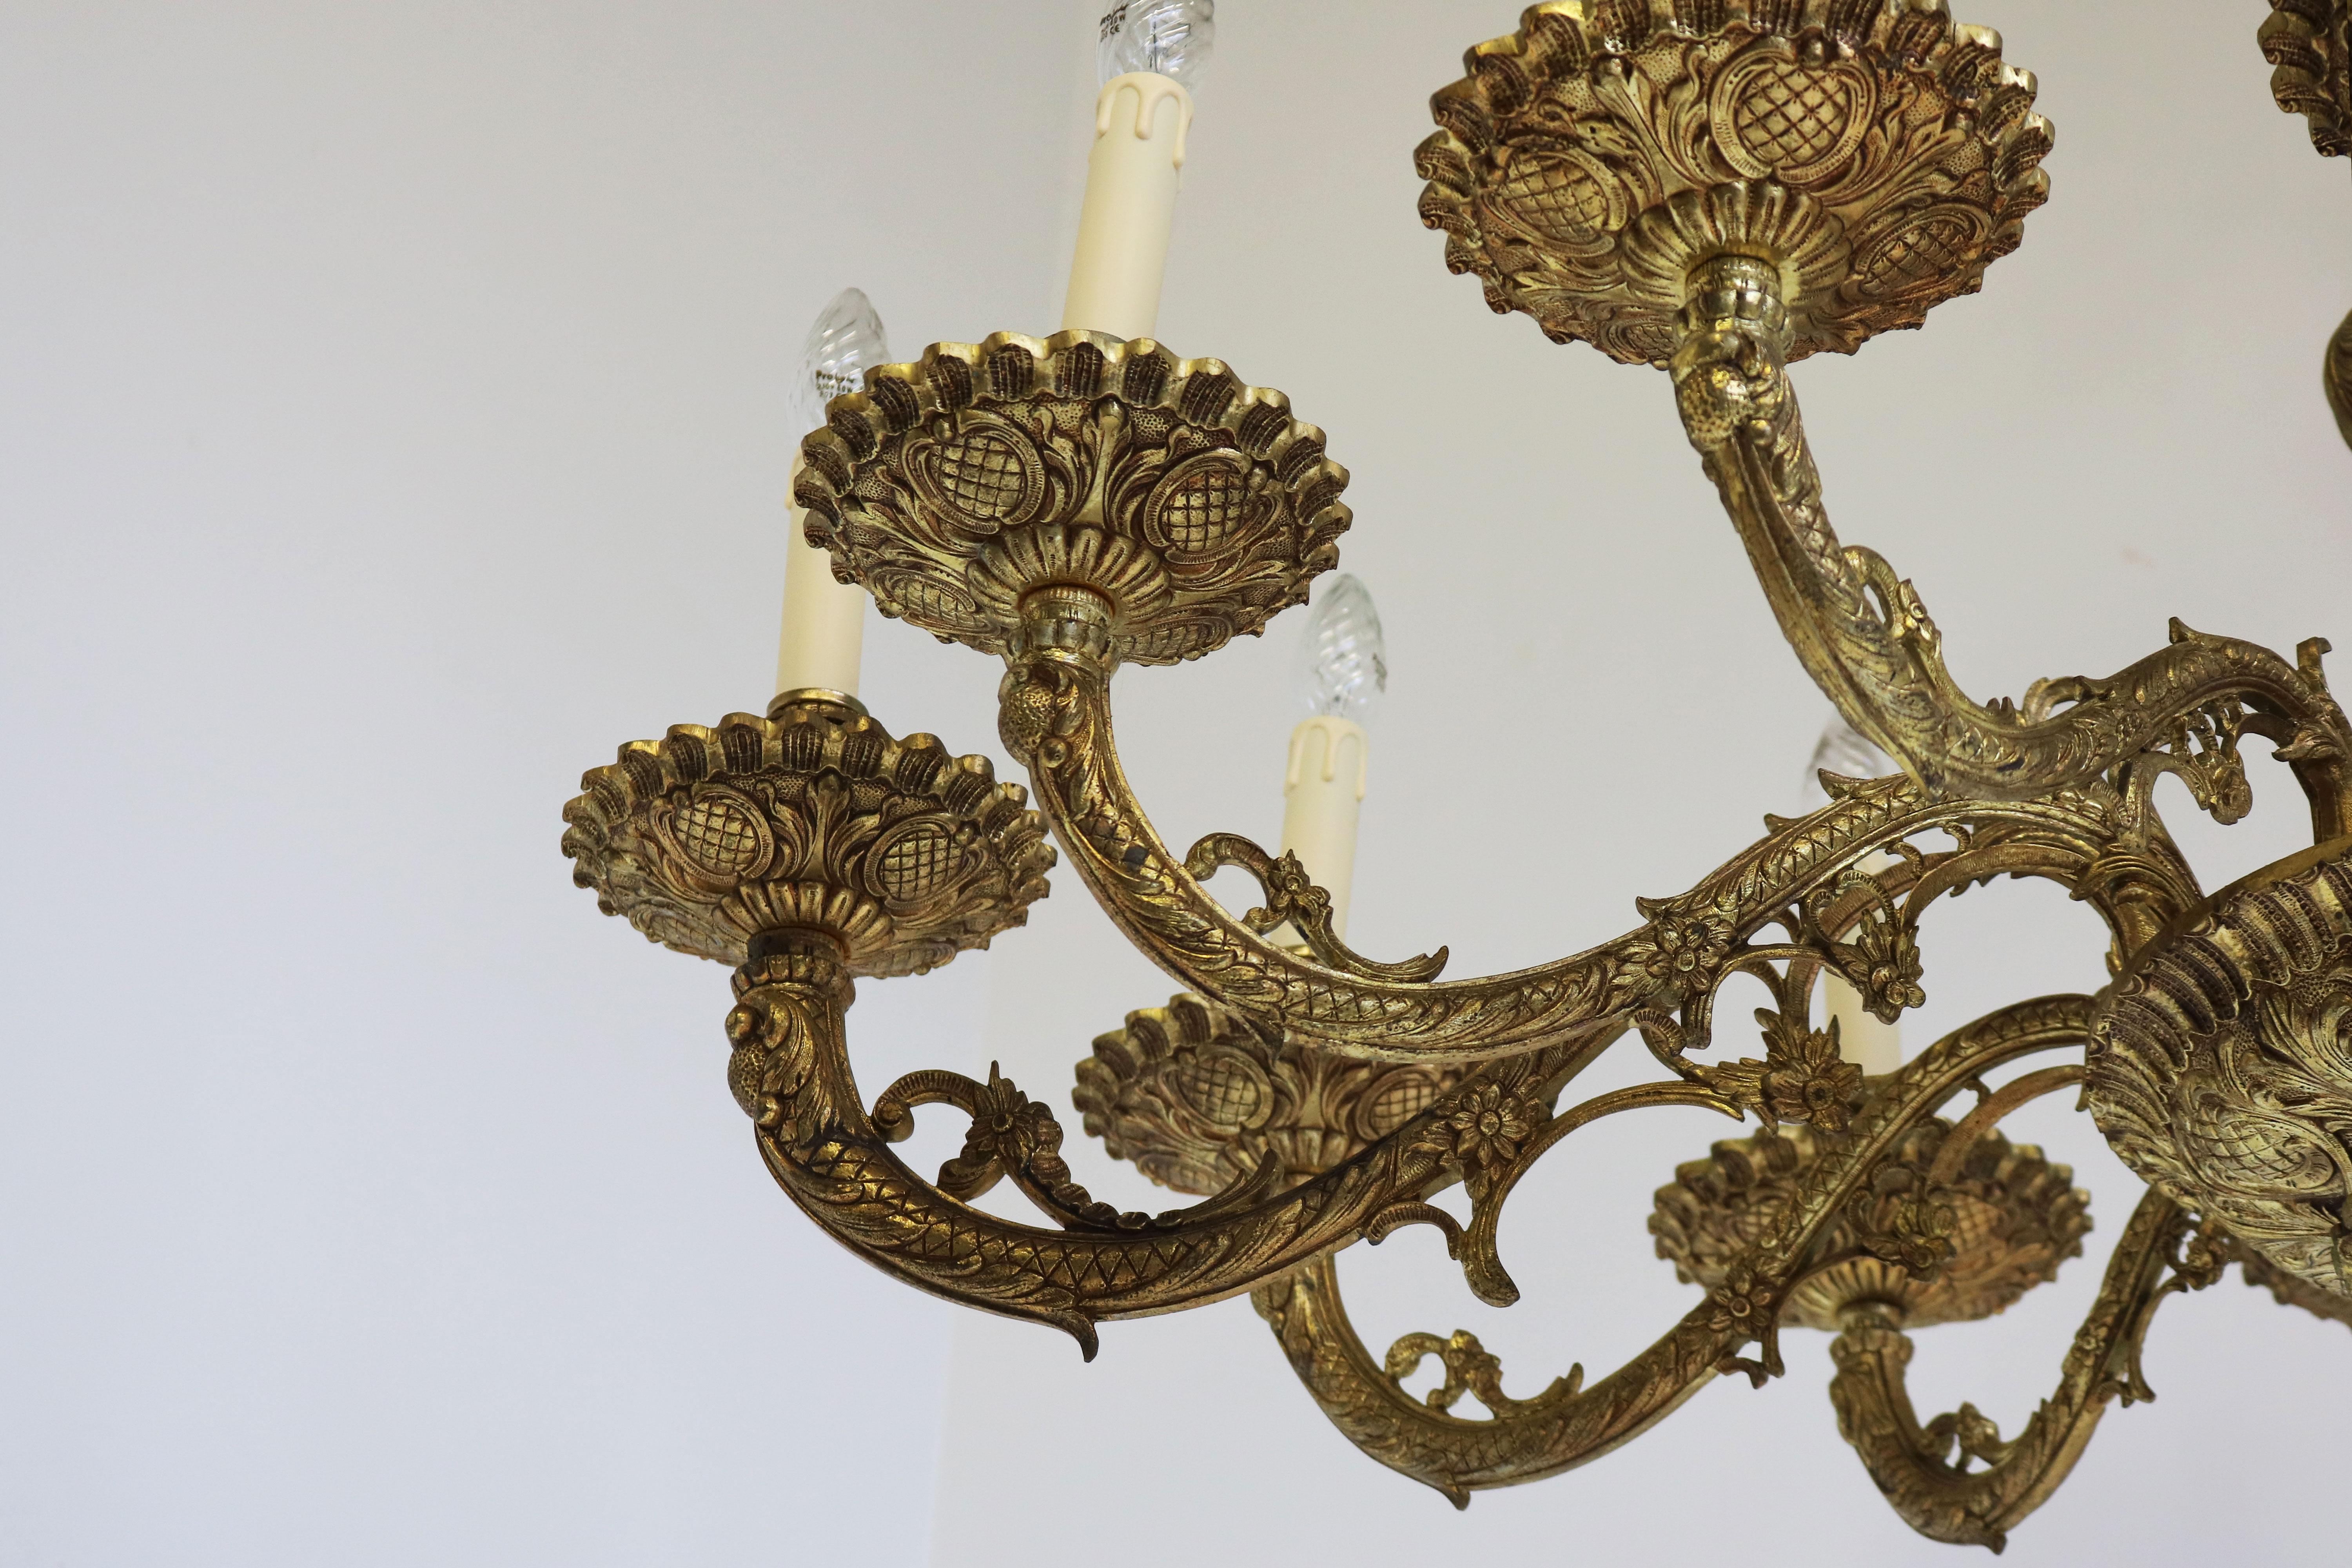 Rococo Revival Impressive Italian Antique Oval Chandelier 1920s Classical Style Cast Brass Gold For Sale